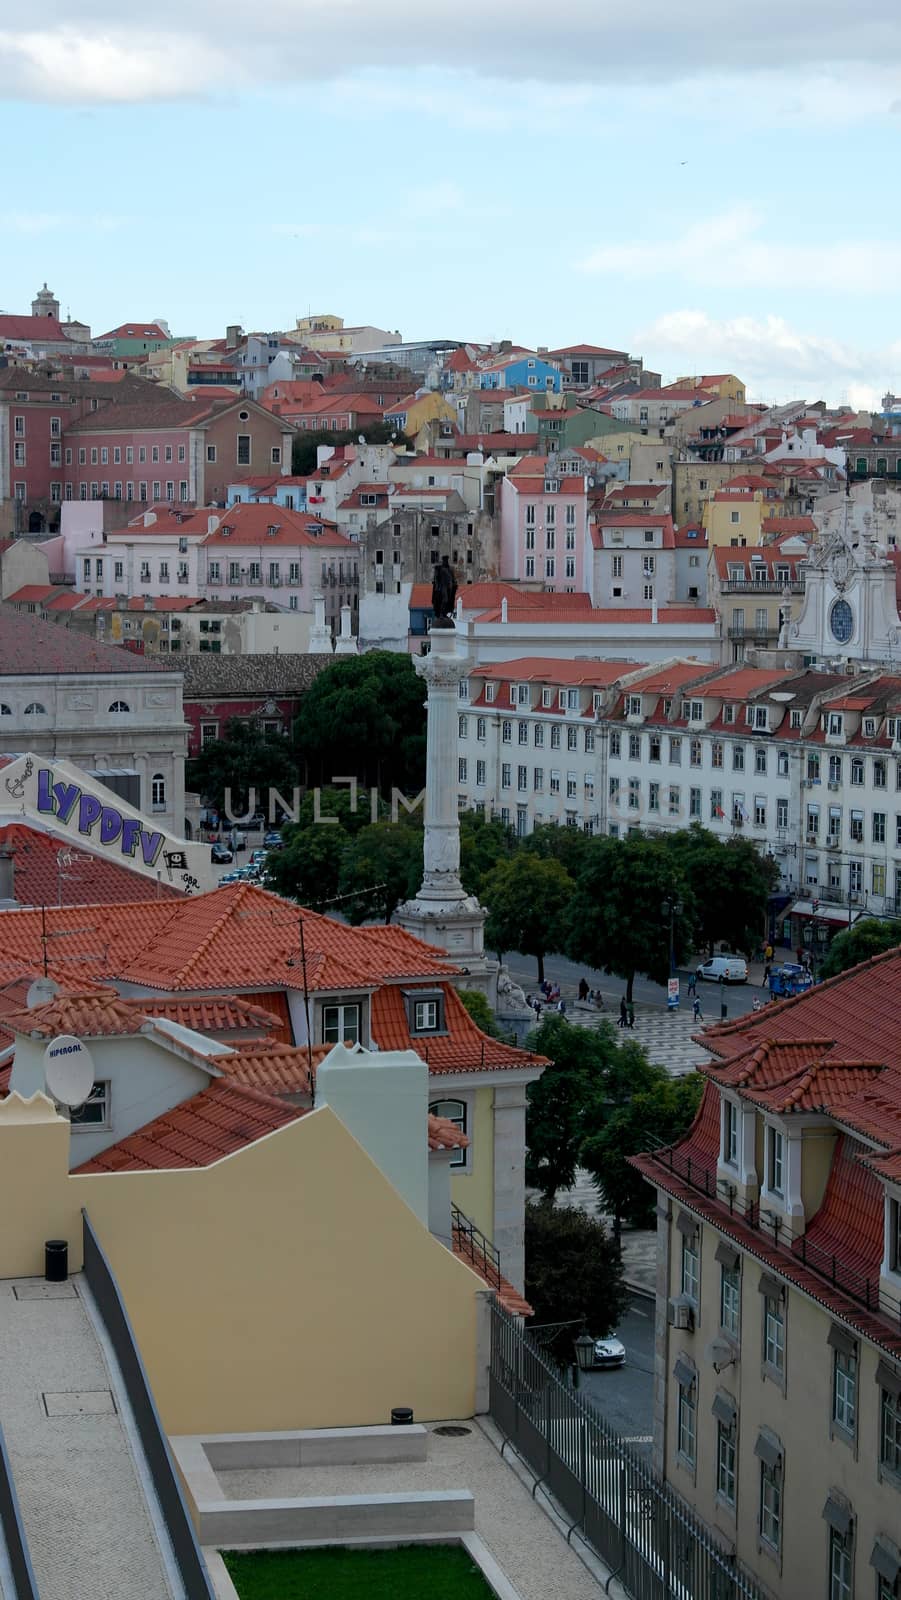 View over the capital city of Portugal, Lisbon